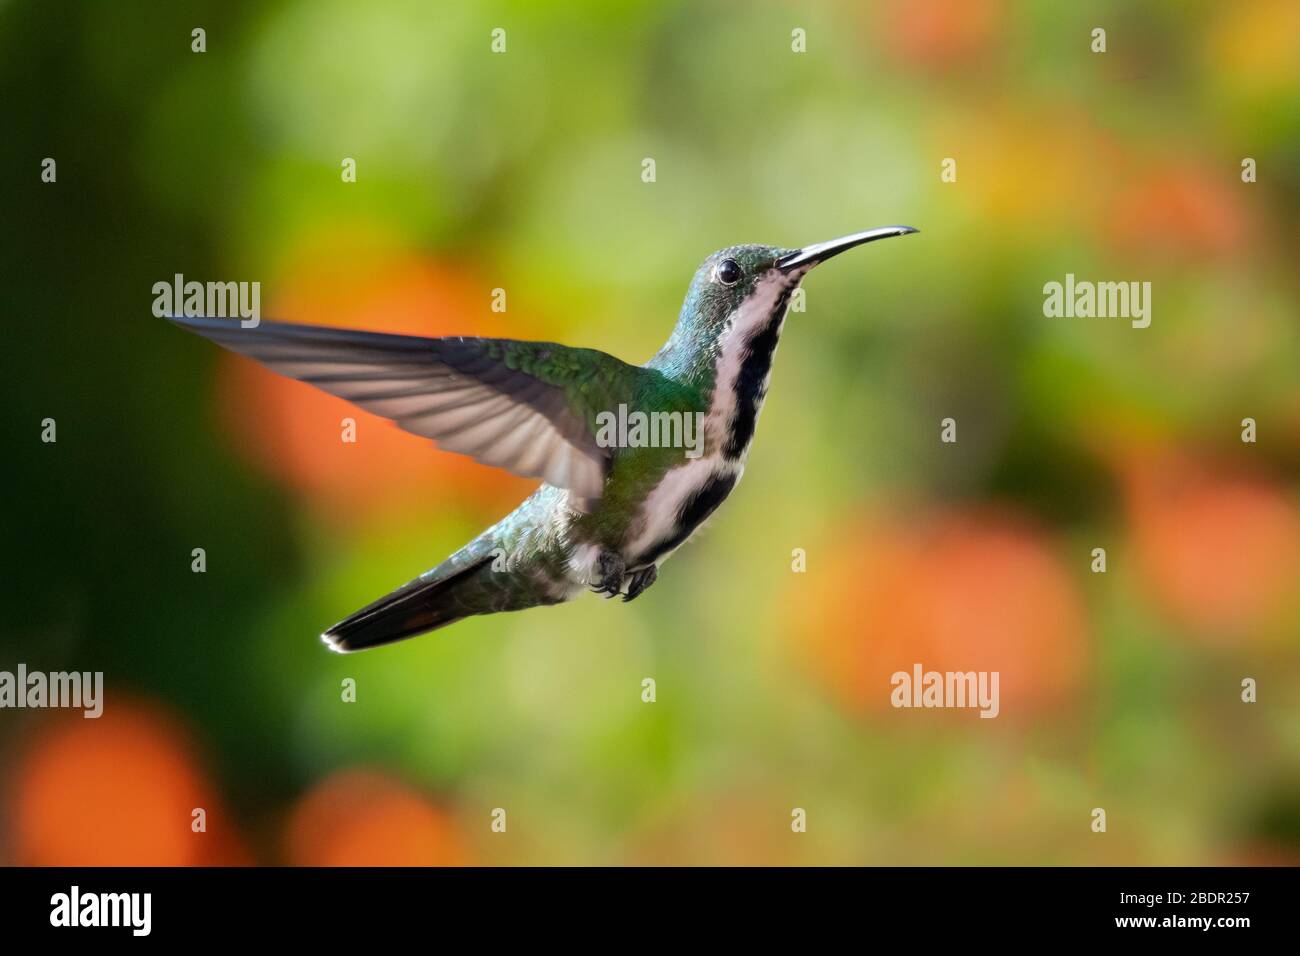 A female Black-throated Mango hummingbird hovering in a tropical garden with flowers and foliage blurred in the background. Stock Photo